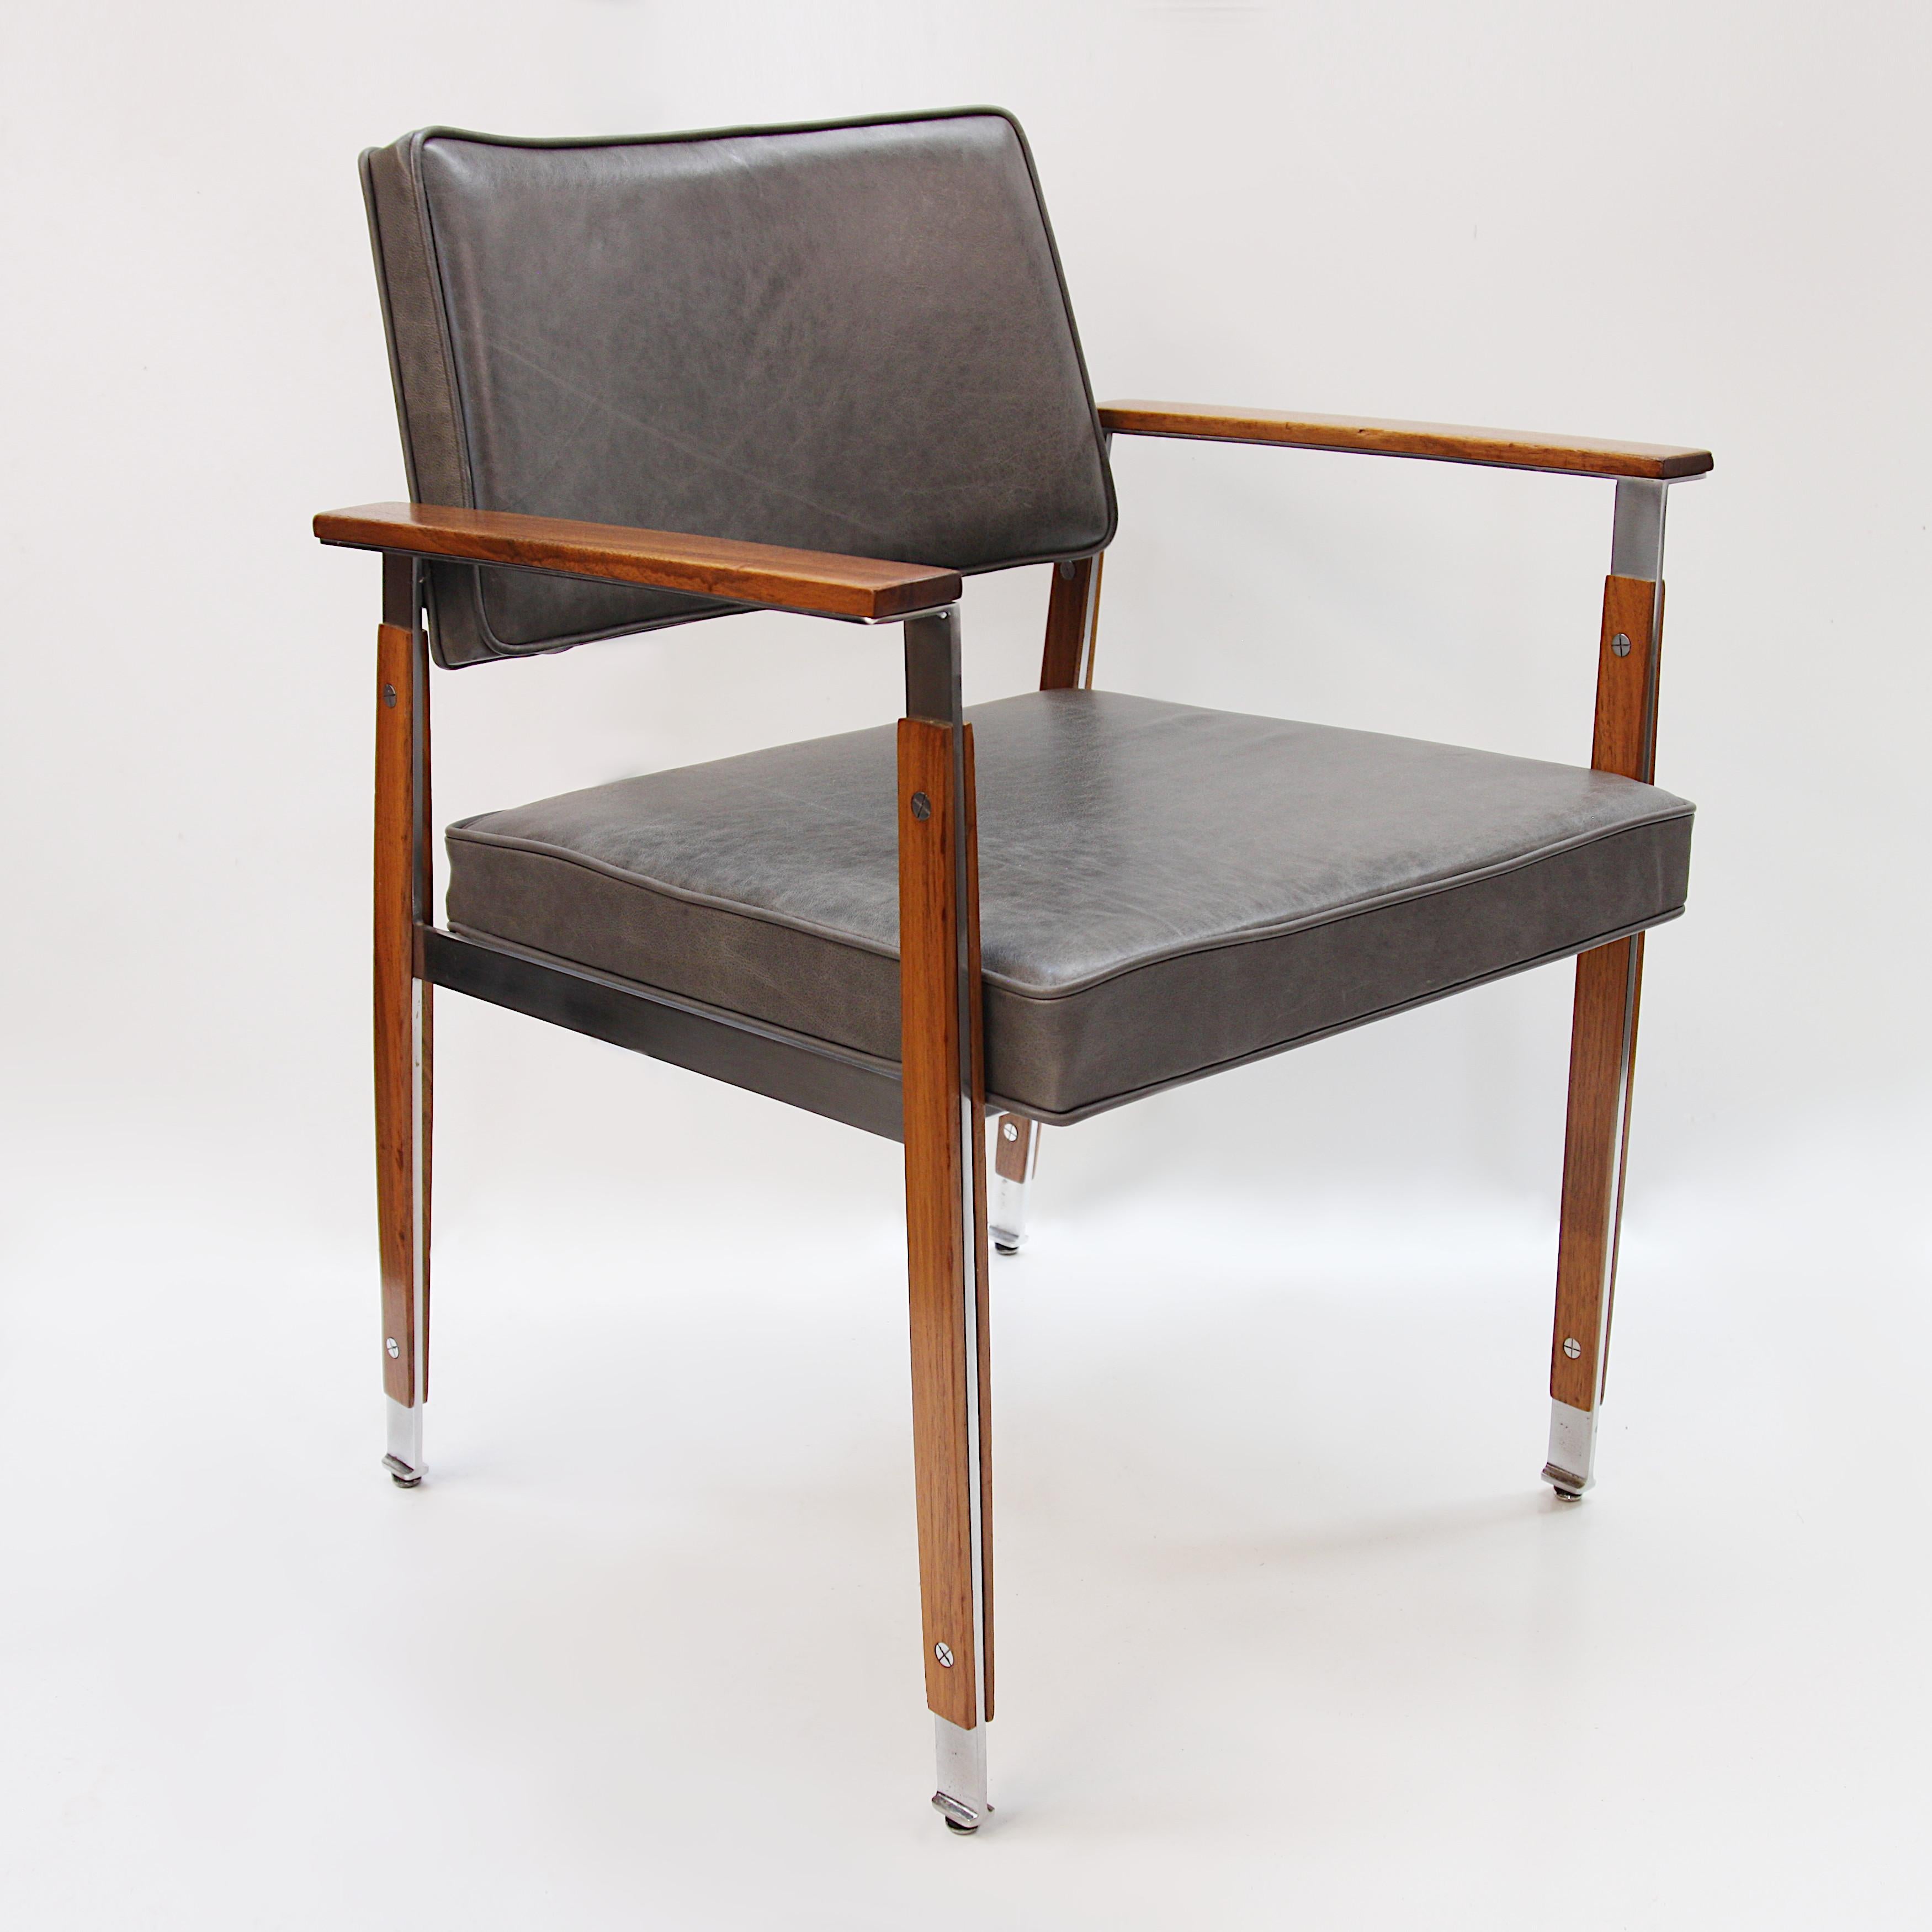 Pair of Mid-Century Modern Side Chairs by William B Sklaroff for Robert John In Good Condition For Sale In Lafayette, IN